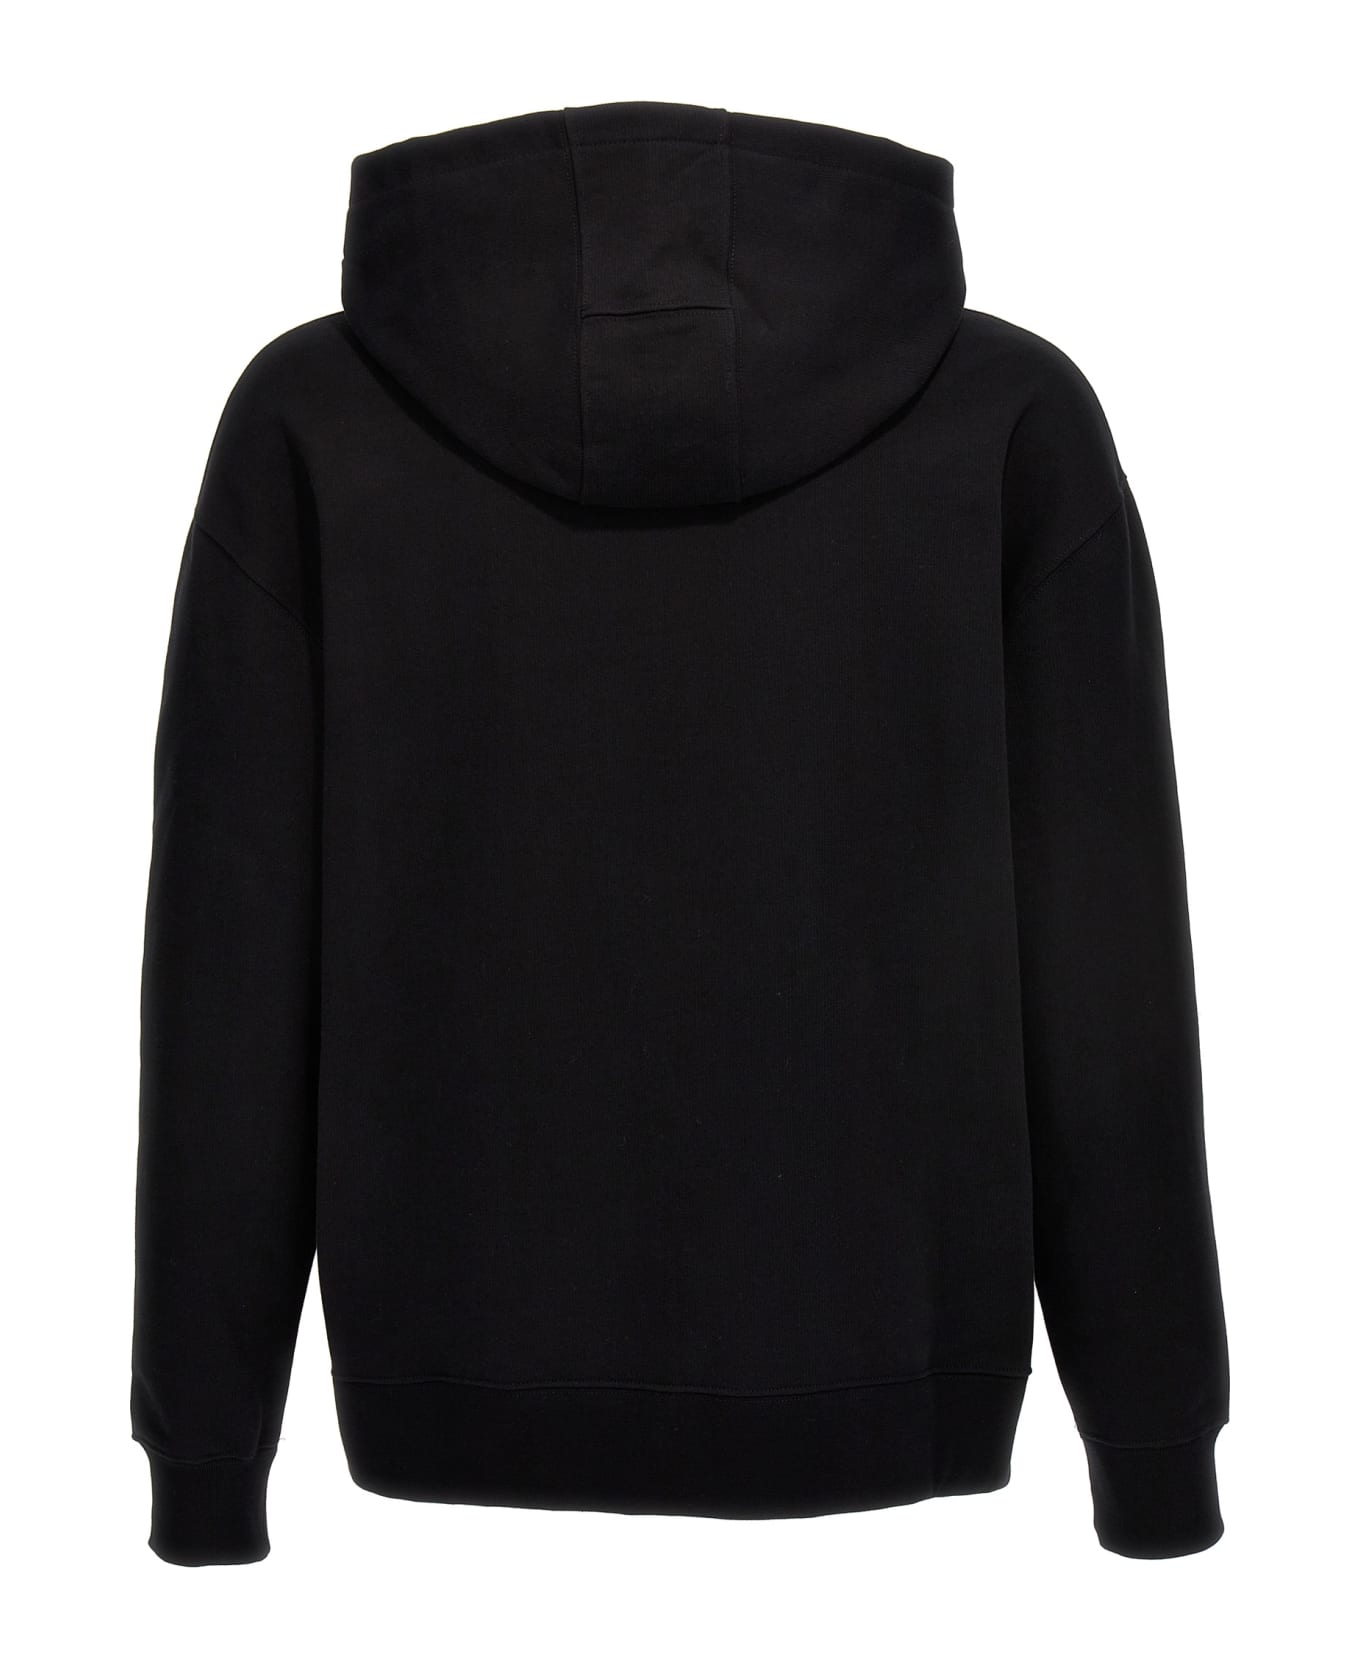 A-COLD-WALL 'essential Small Logo' Hoodie - Black  